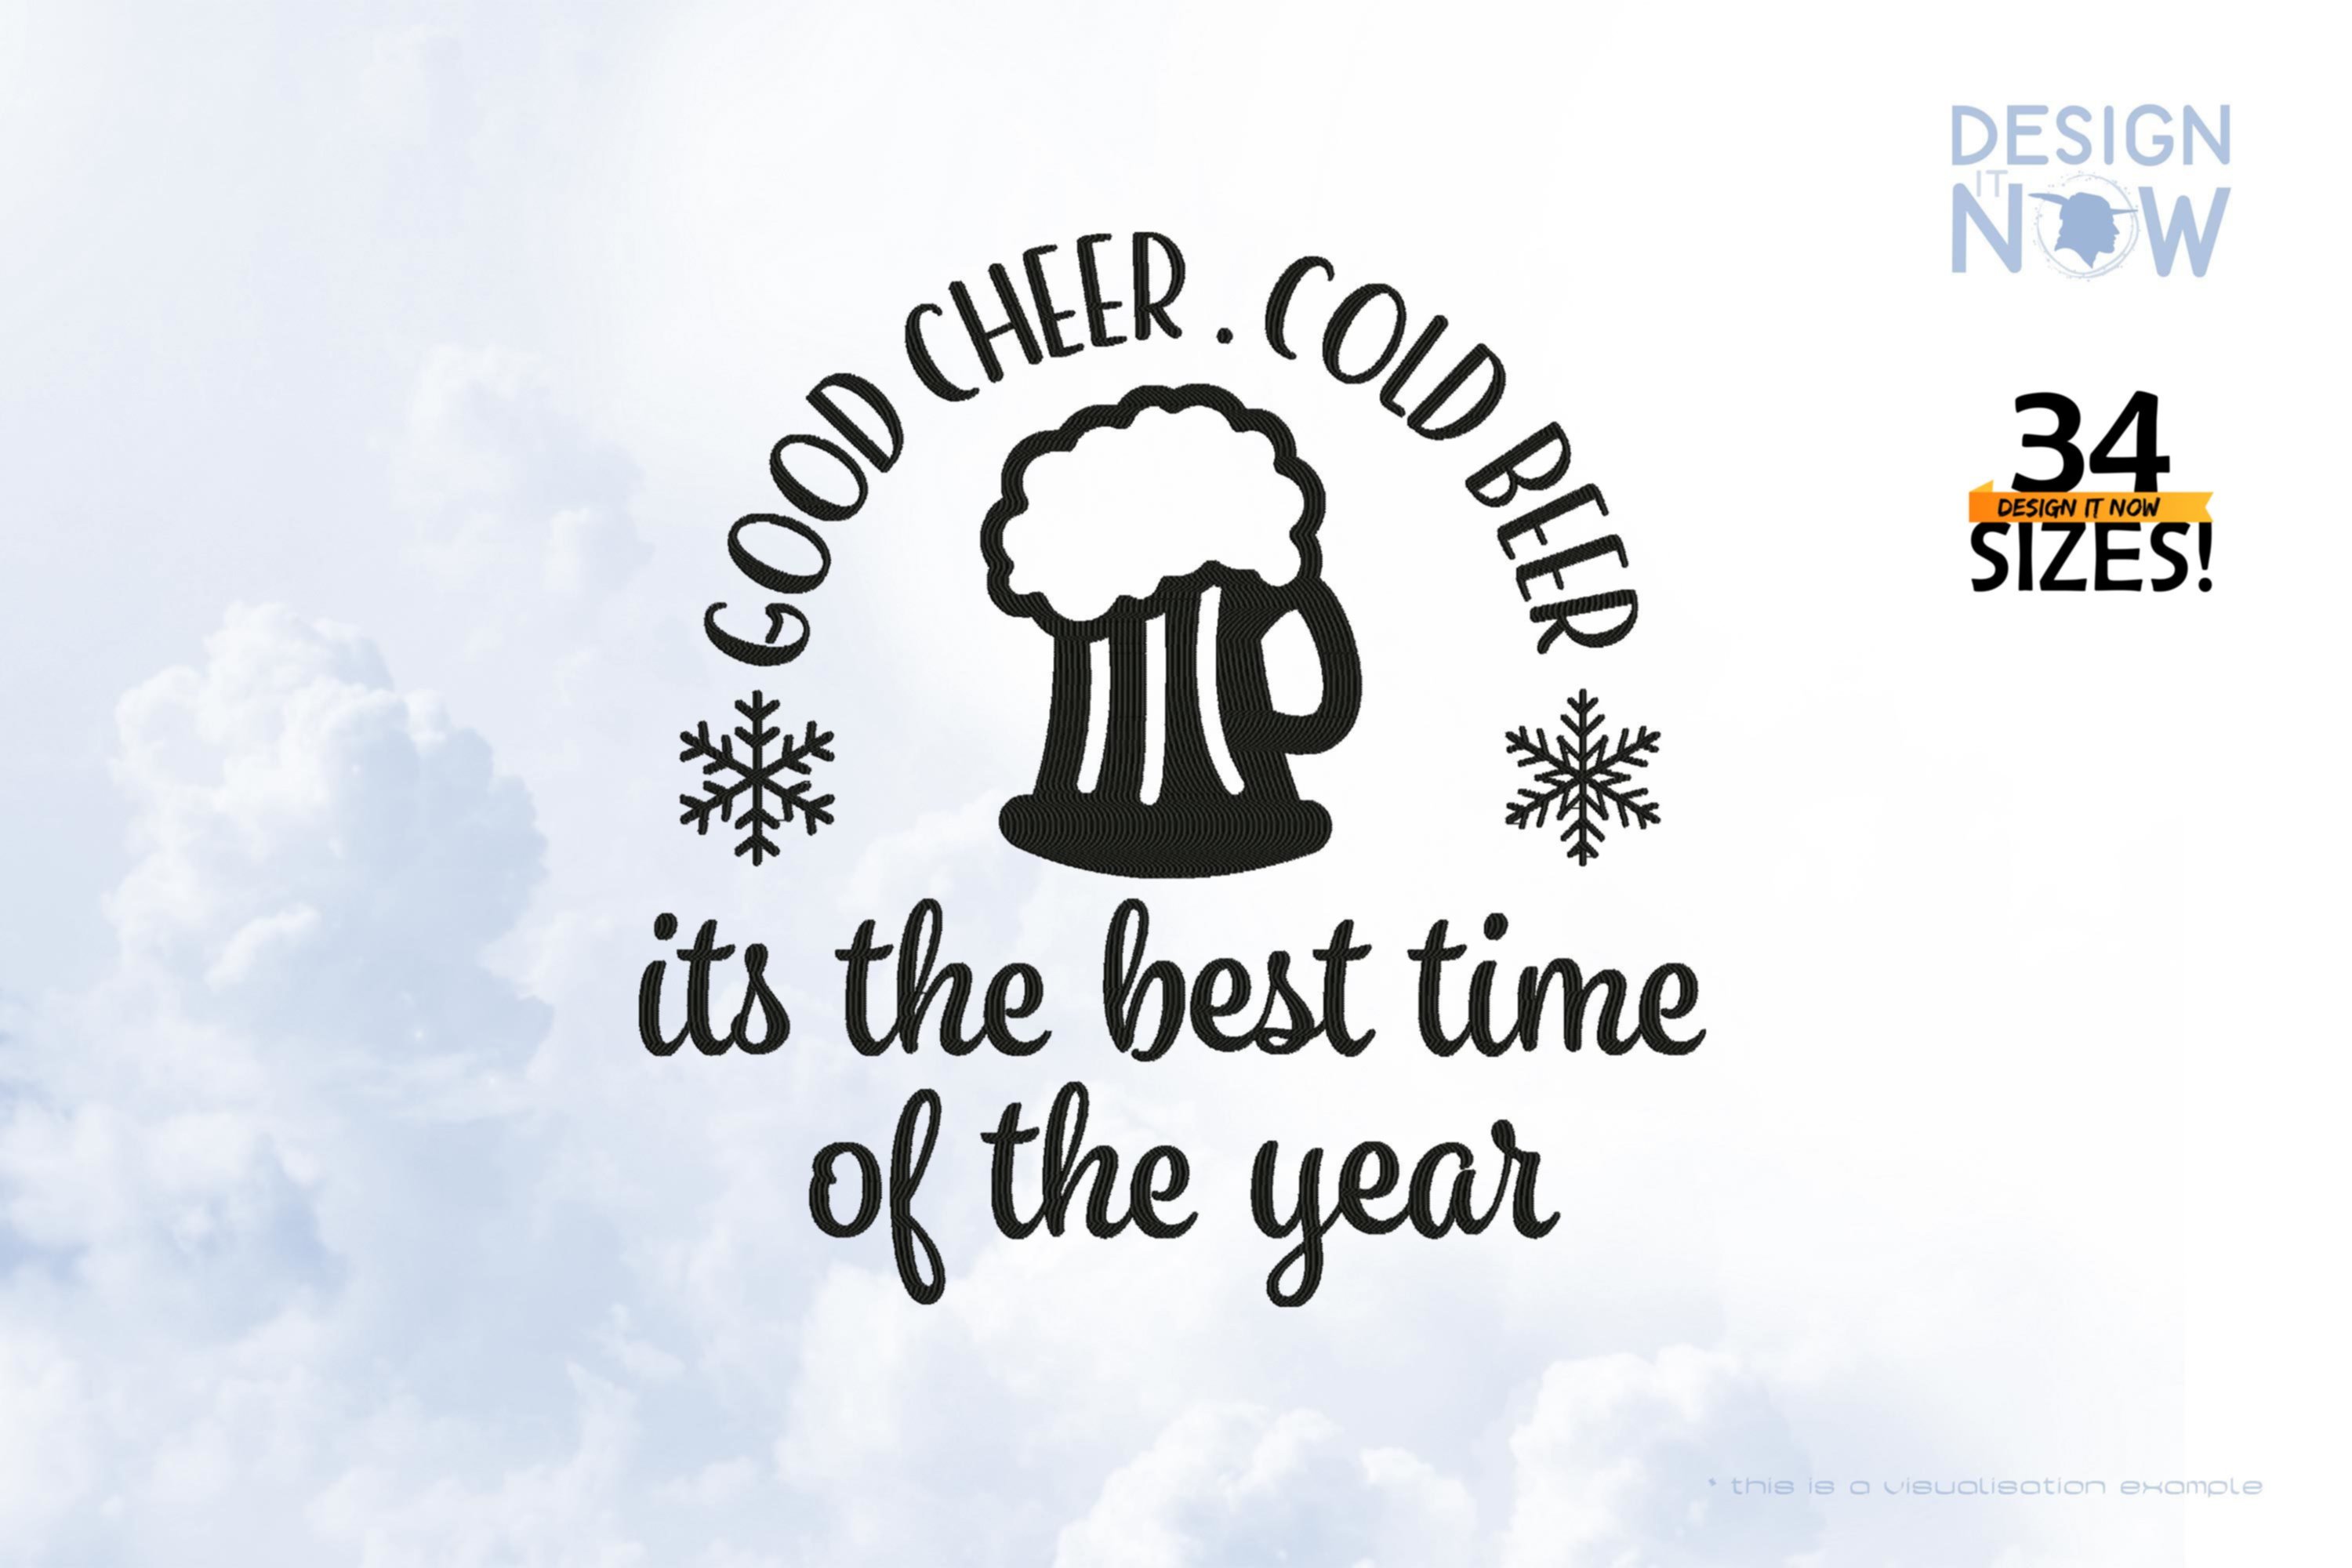 Good Cheer Cold Beer